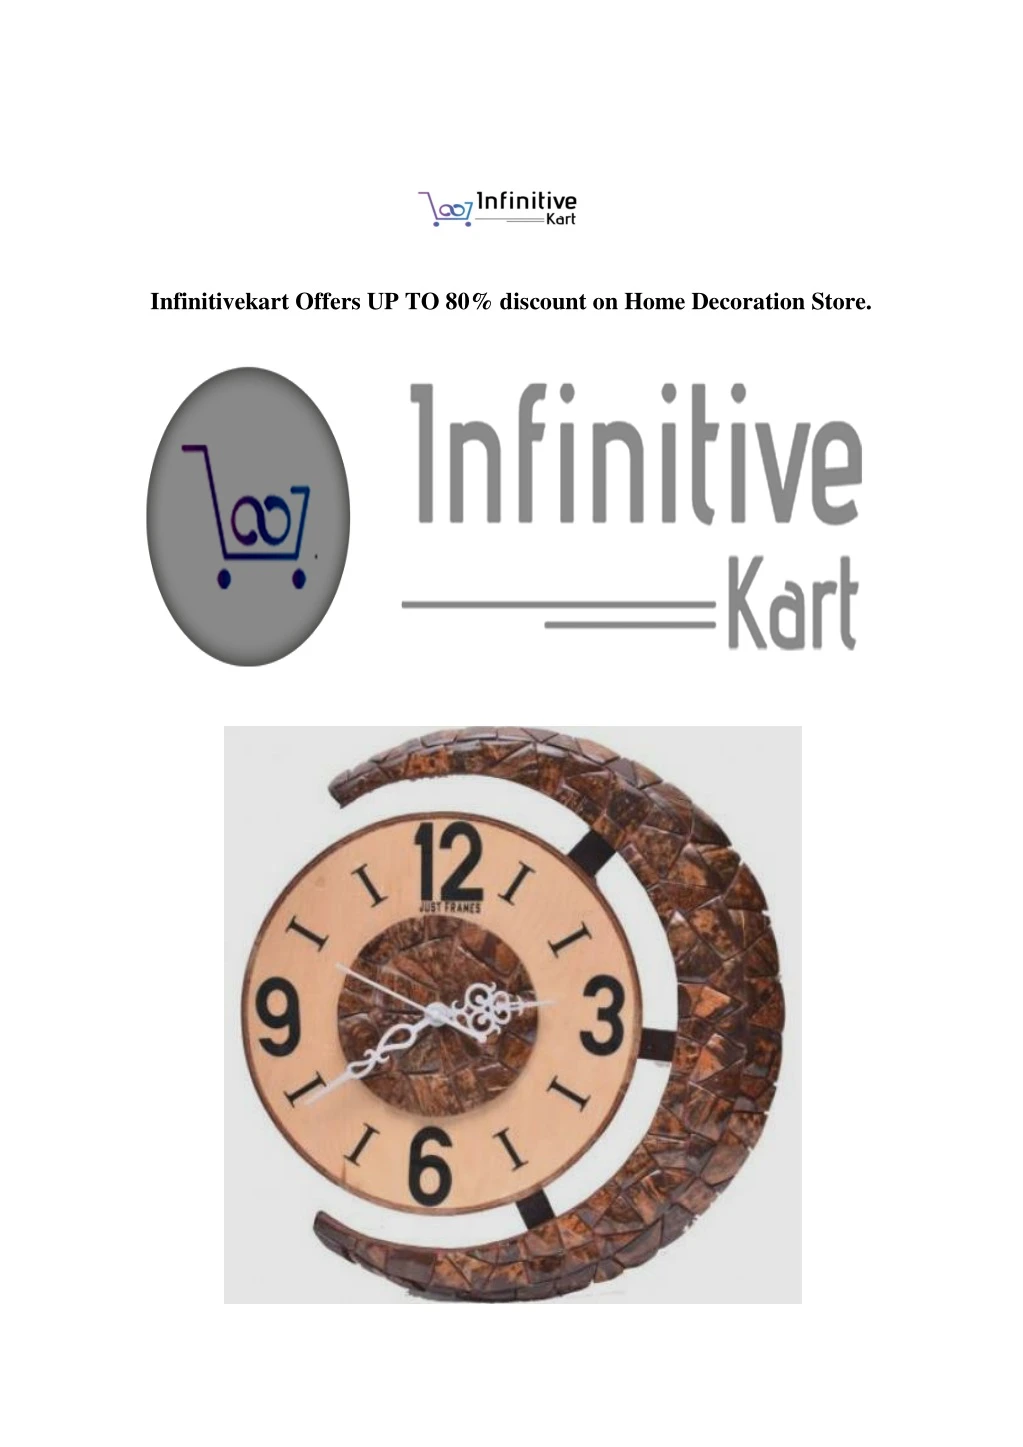 infinitivekart offers up to 80 discount on home